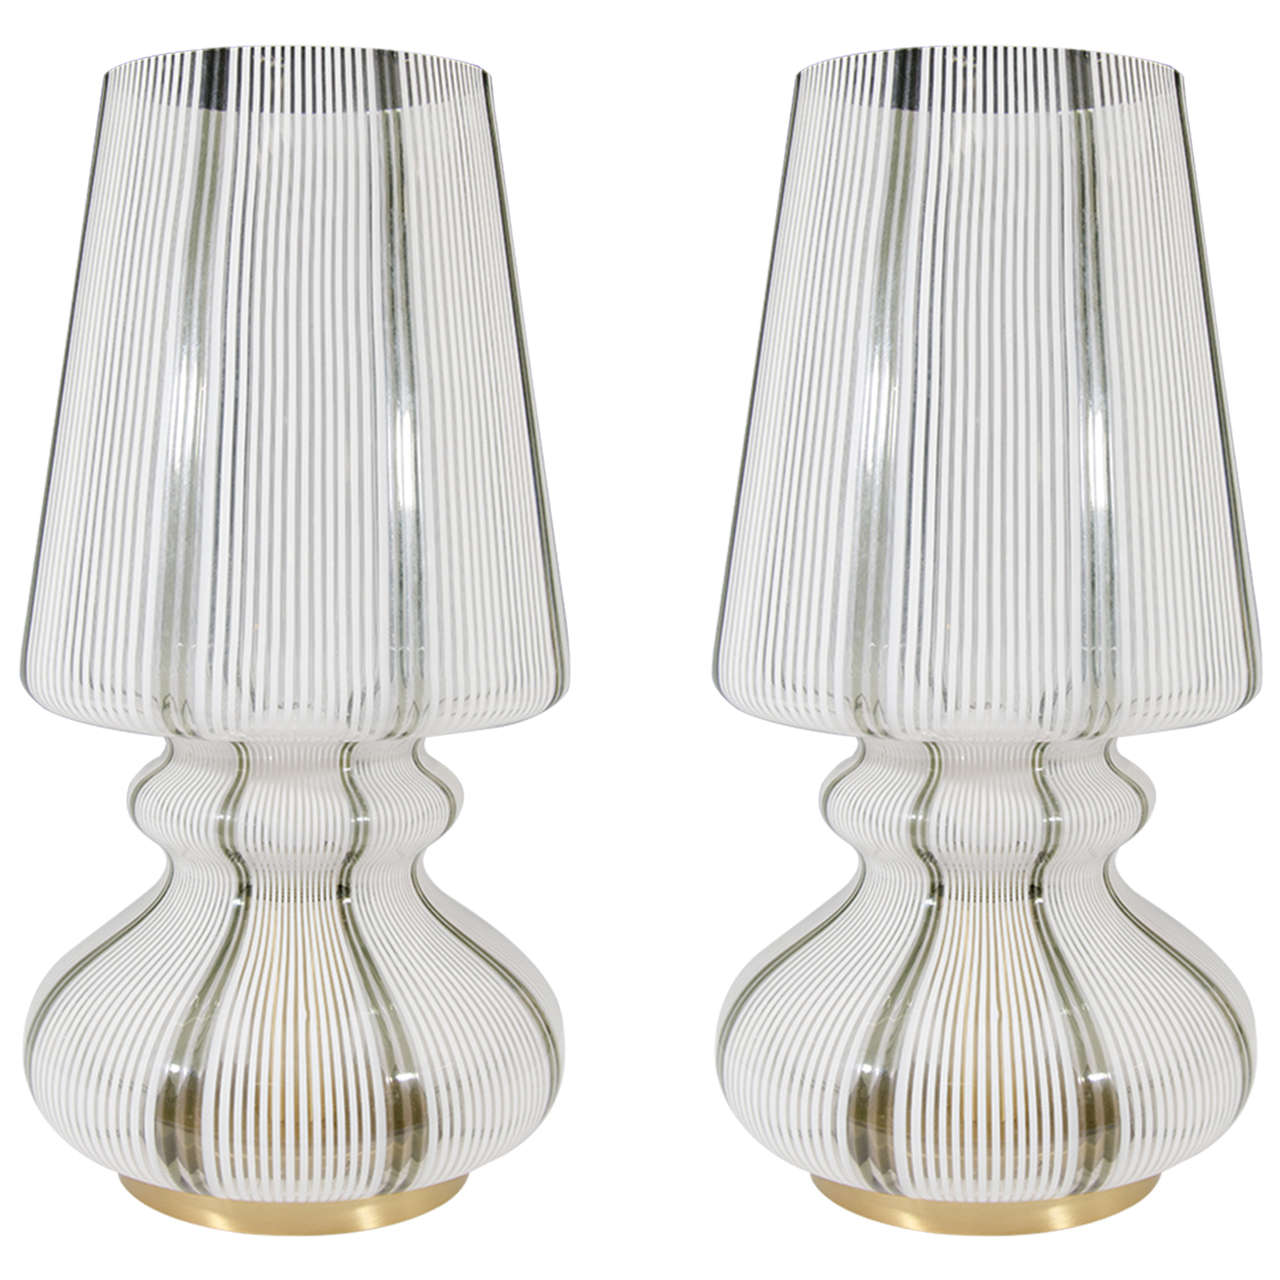 A Midcentury Pair of White Murano Glass Striped Table Lamps